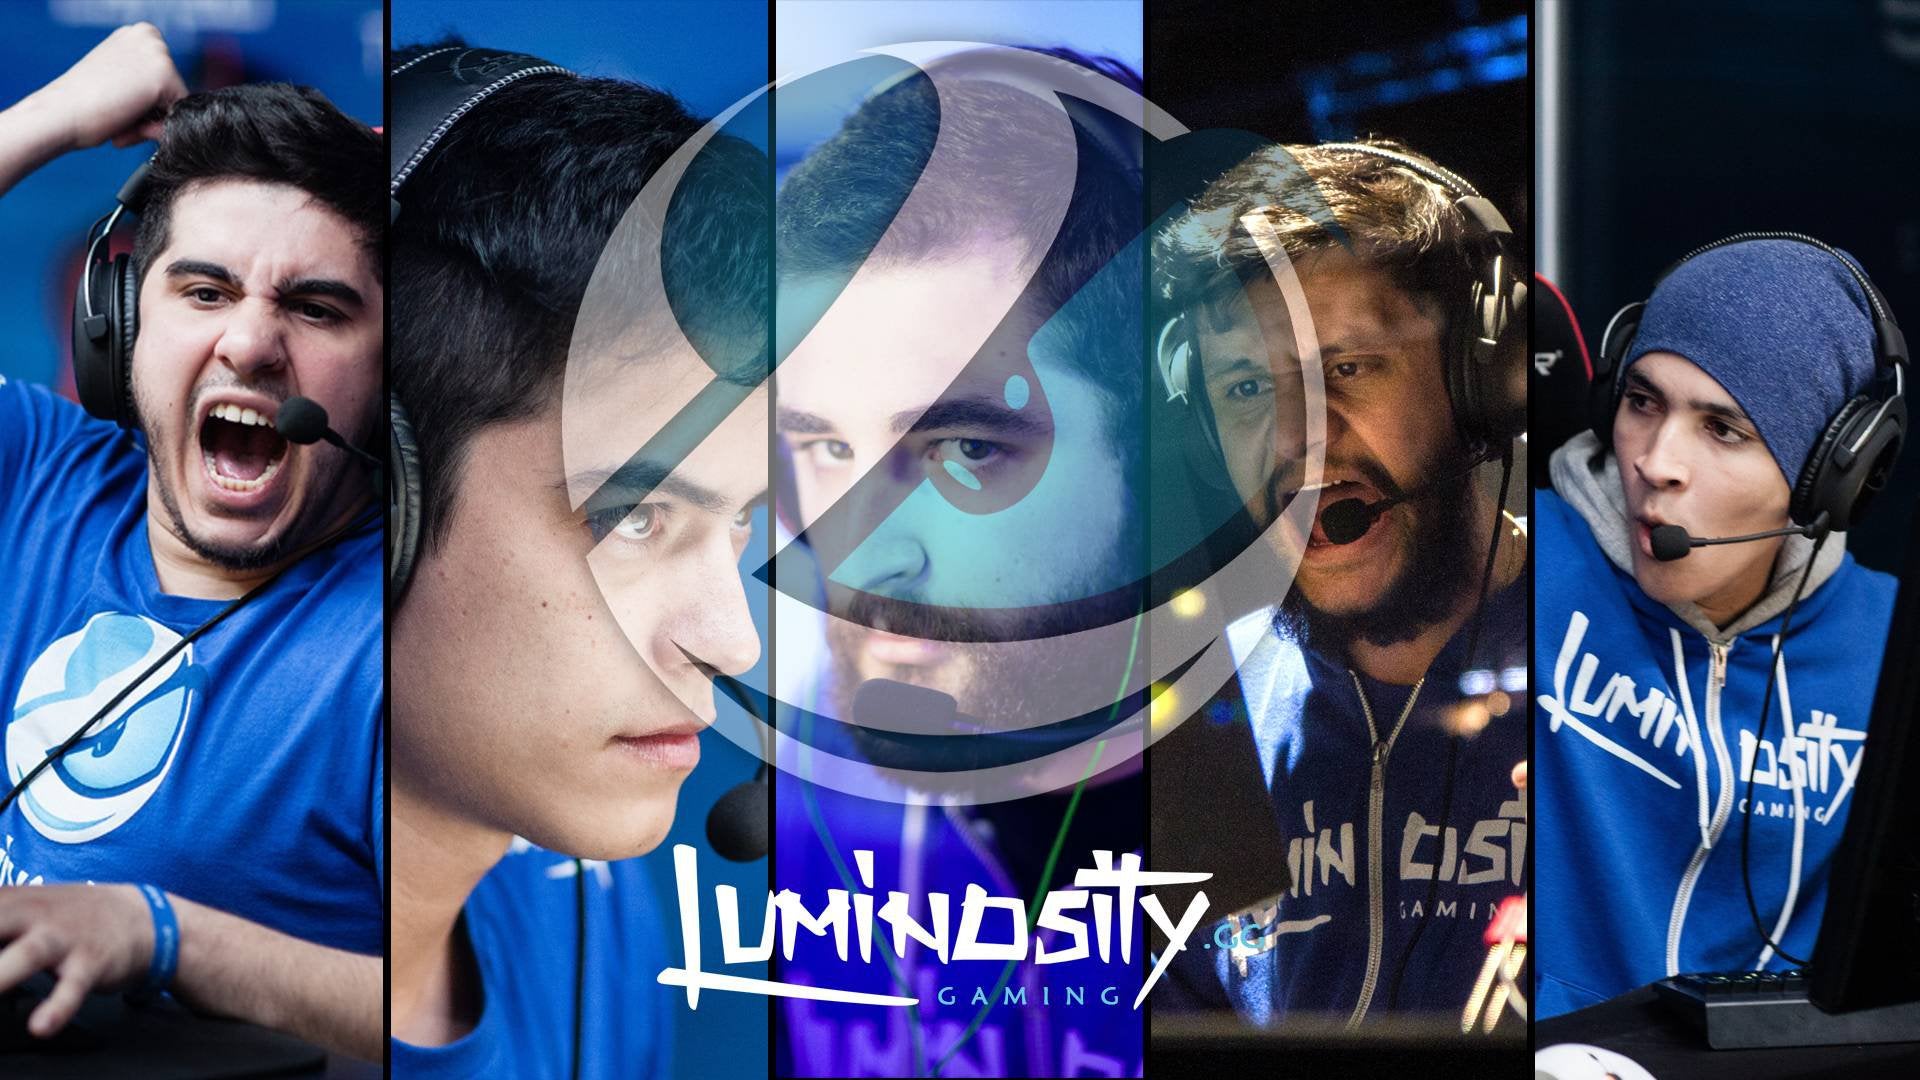 Got a bit bored, decided to join the bandwagon and make a Luminosity Gaming wallpaper